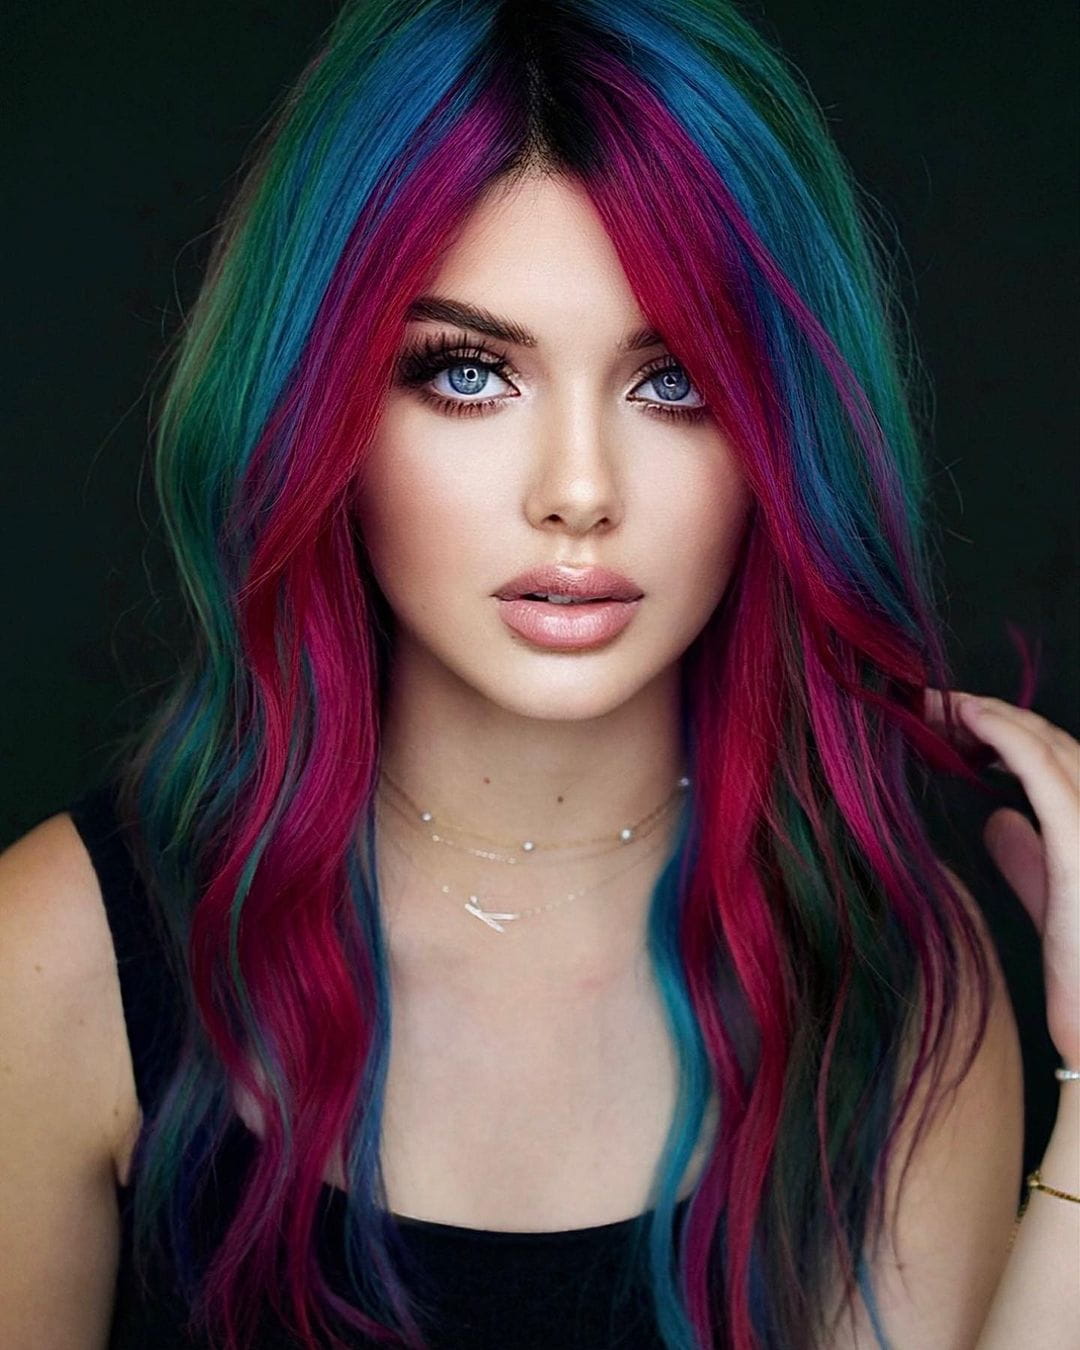 100+ Hairstyle And Hair Colors For Winter That Are Trending images 50